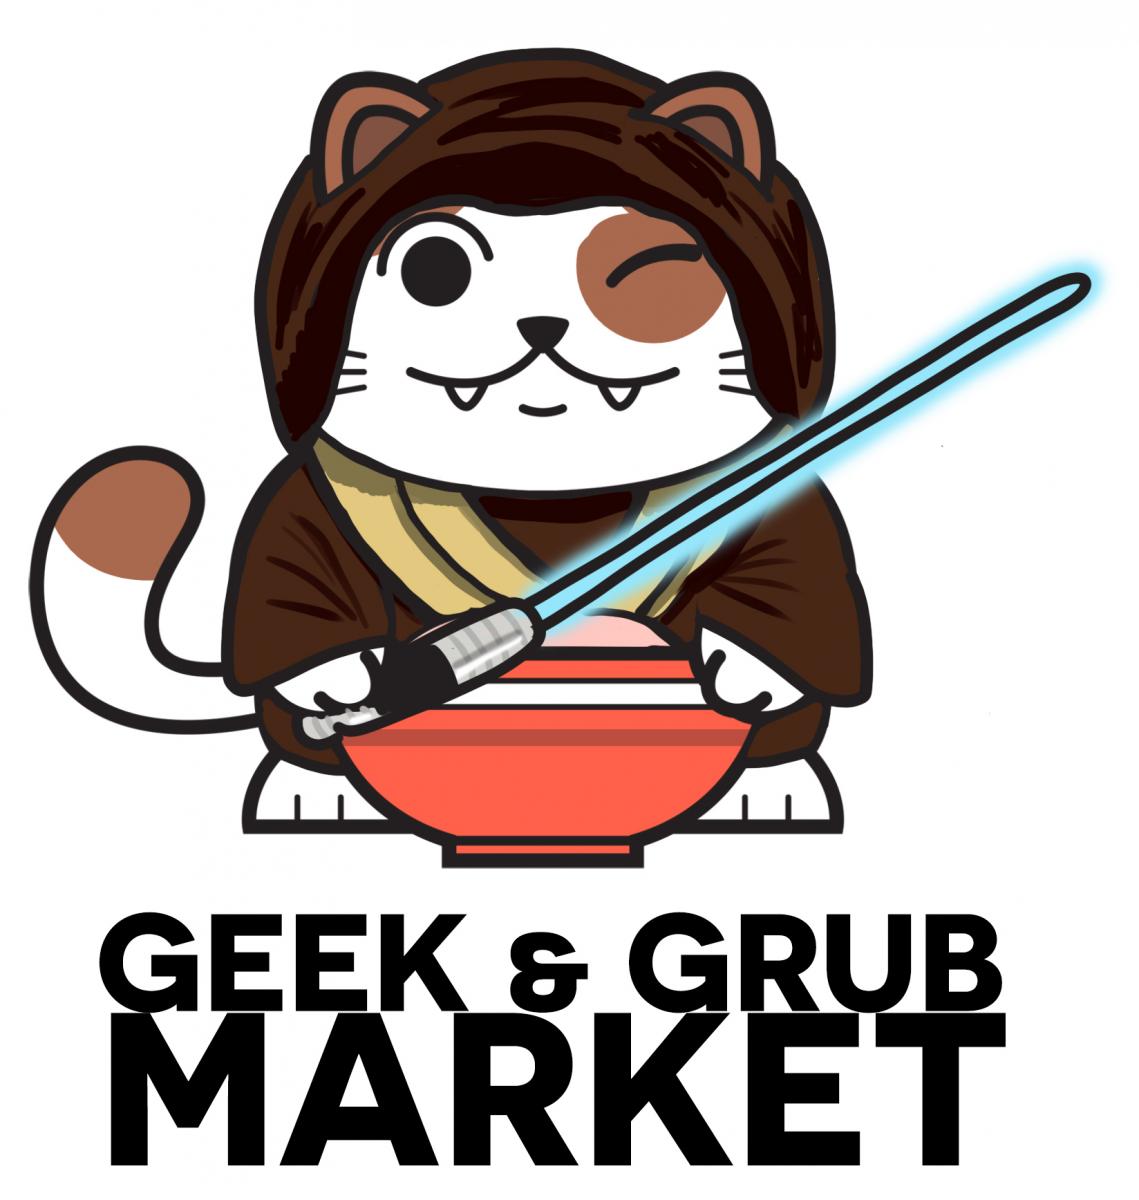 Geek and Grub Market (May the 4th Be With You Edition)